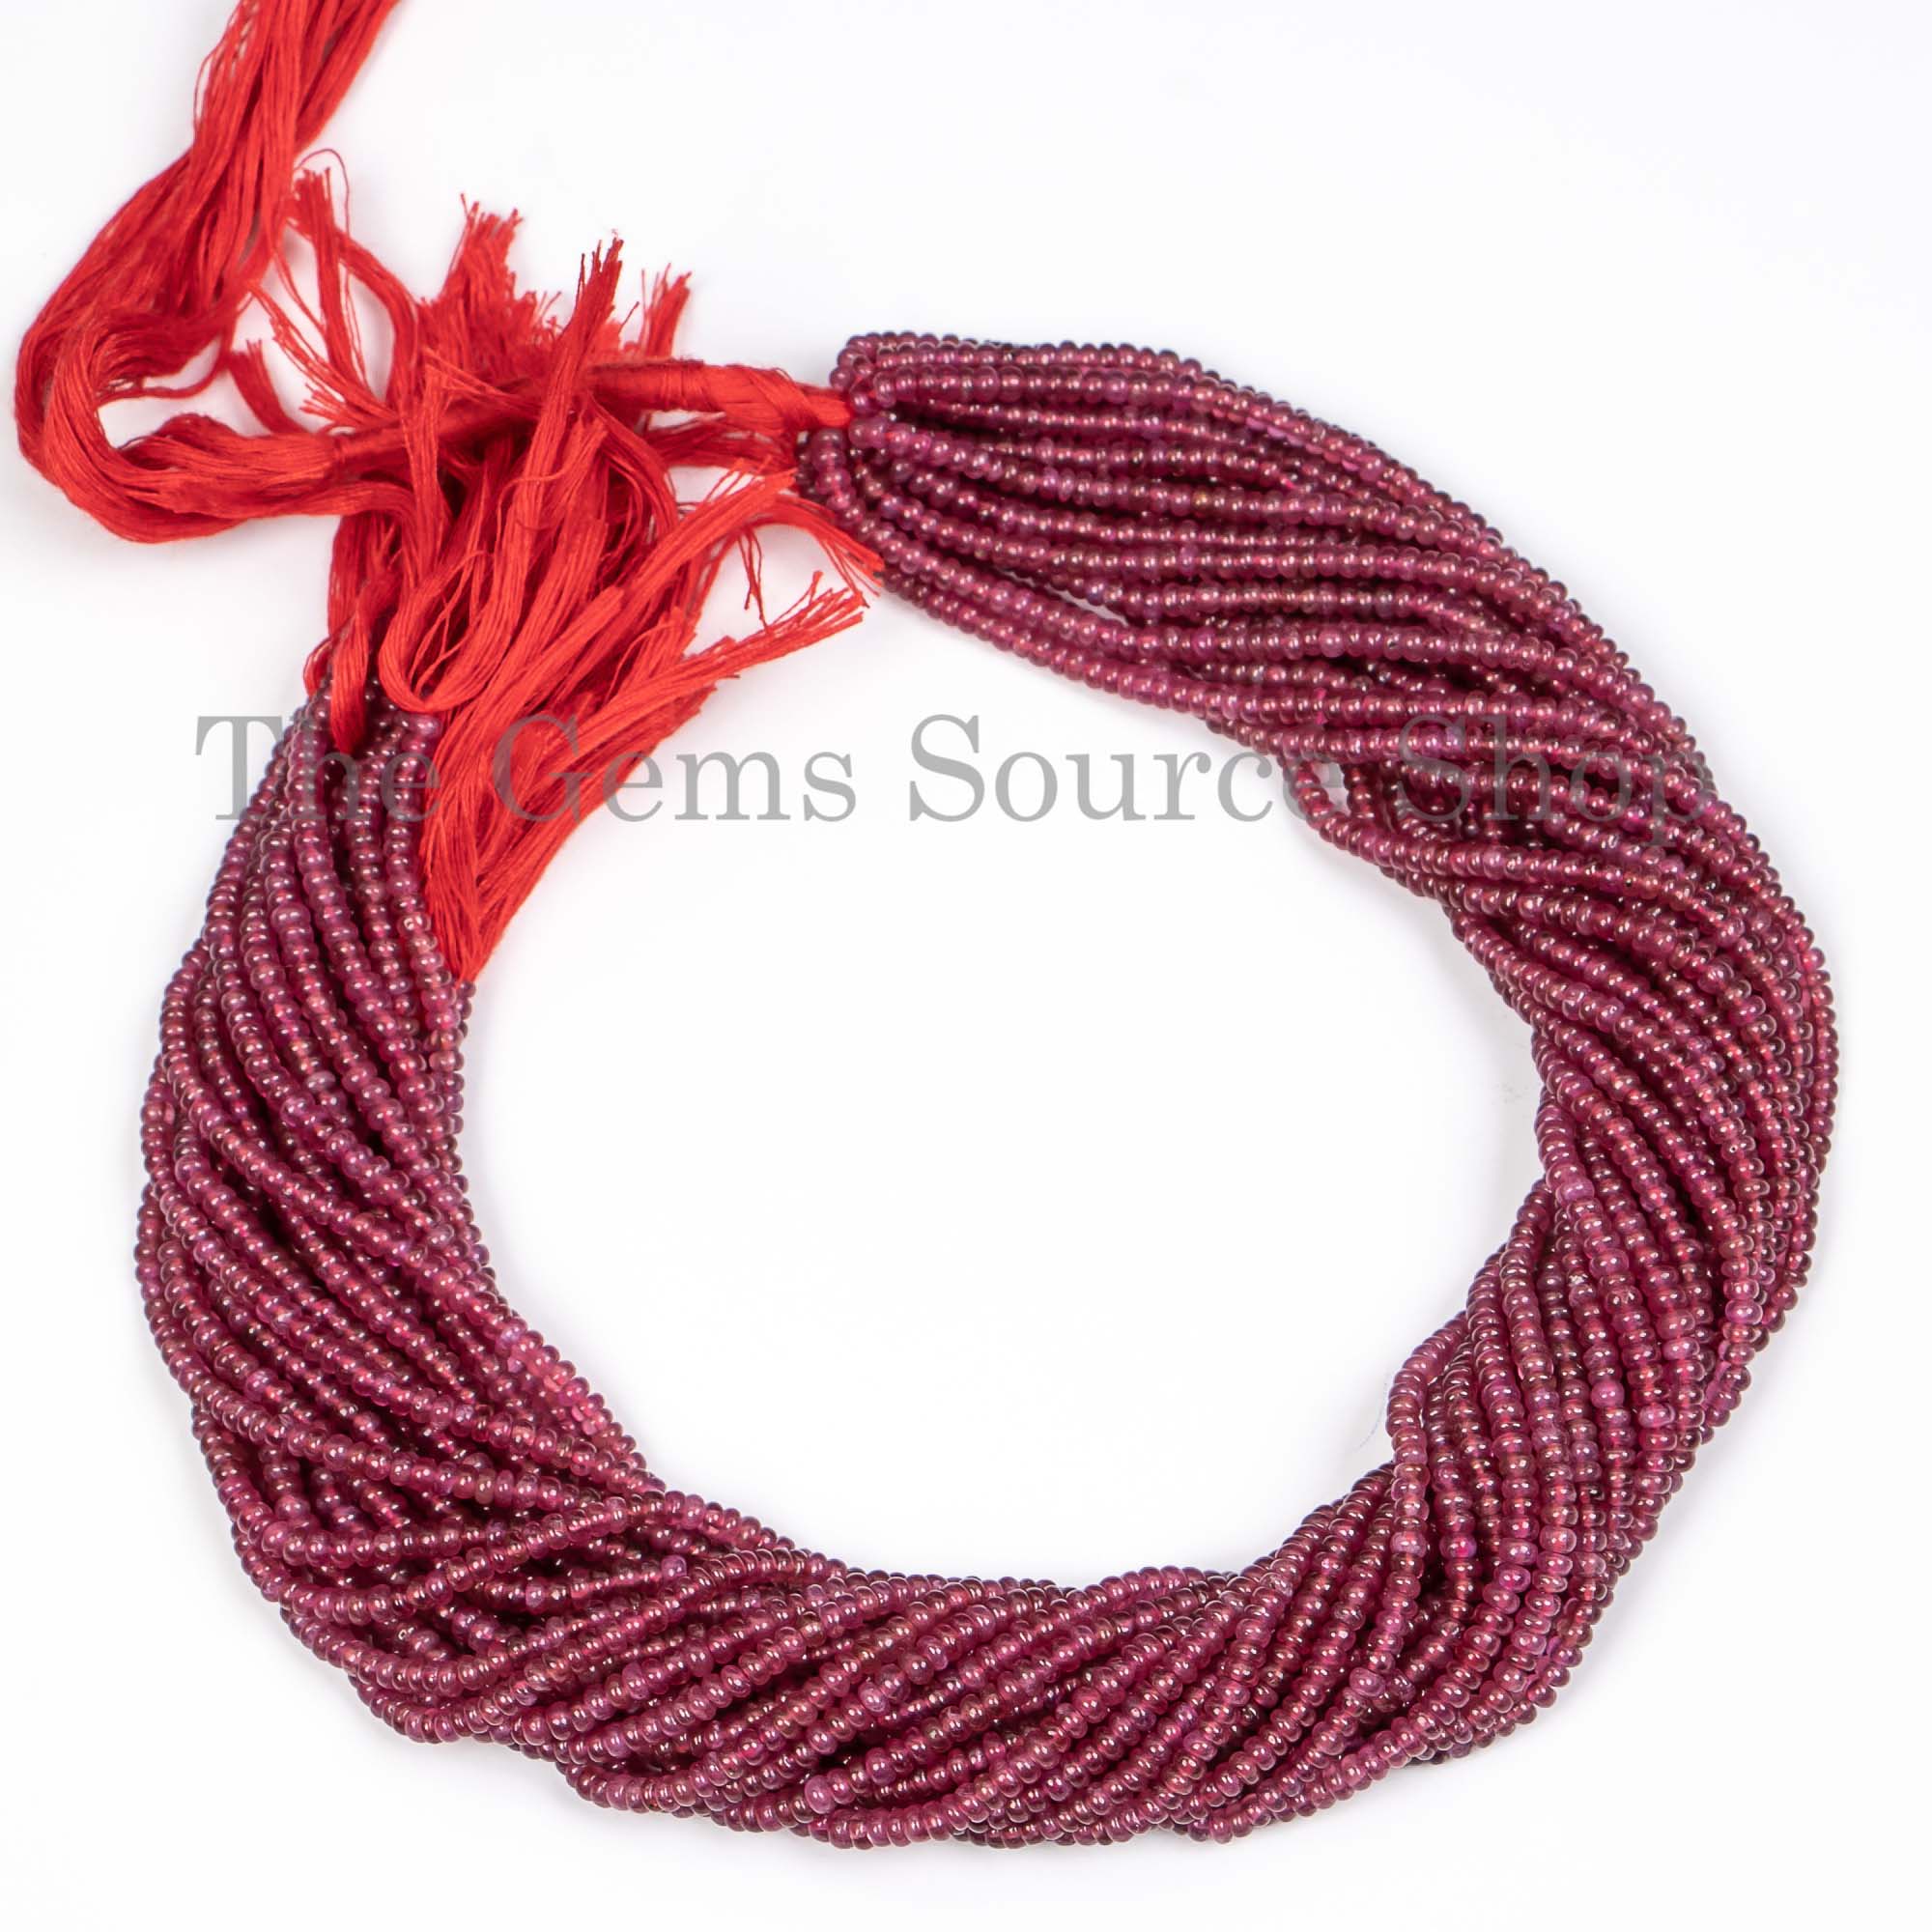 3mm Natural Ruby Smooth Plain Rondelle, Ruby Beads, Ruby Rondelle Beads